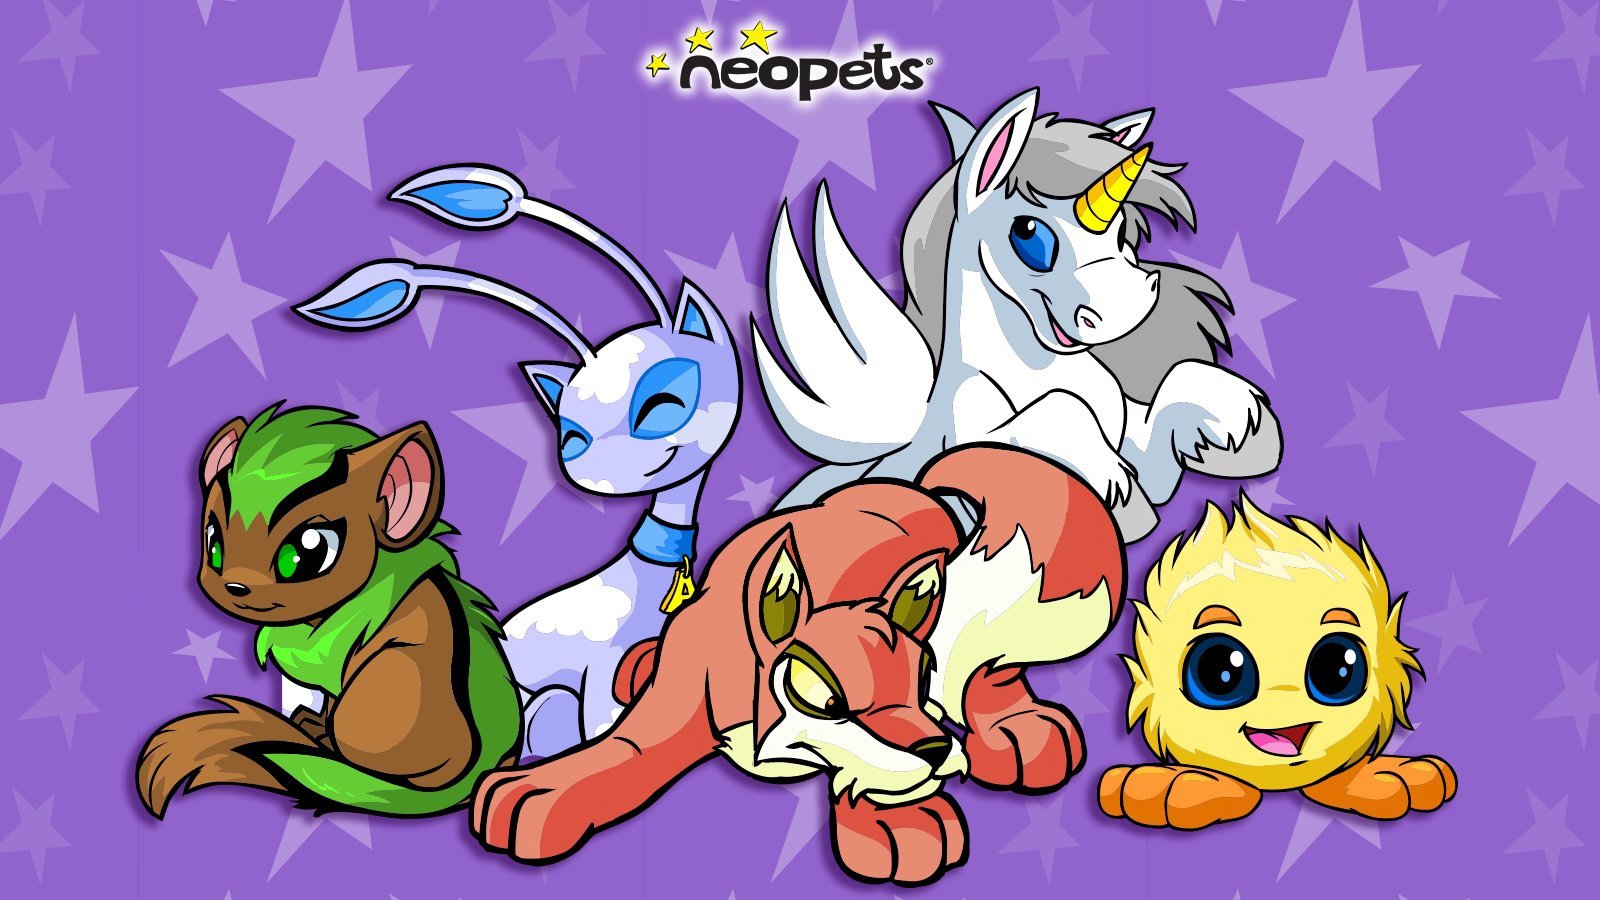 Several Neopets stand together in front of a purple background.